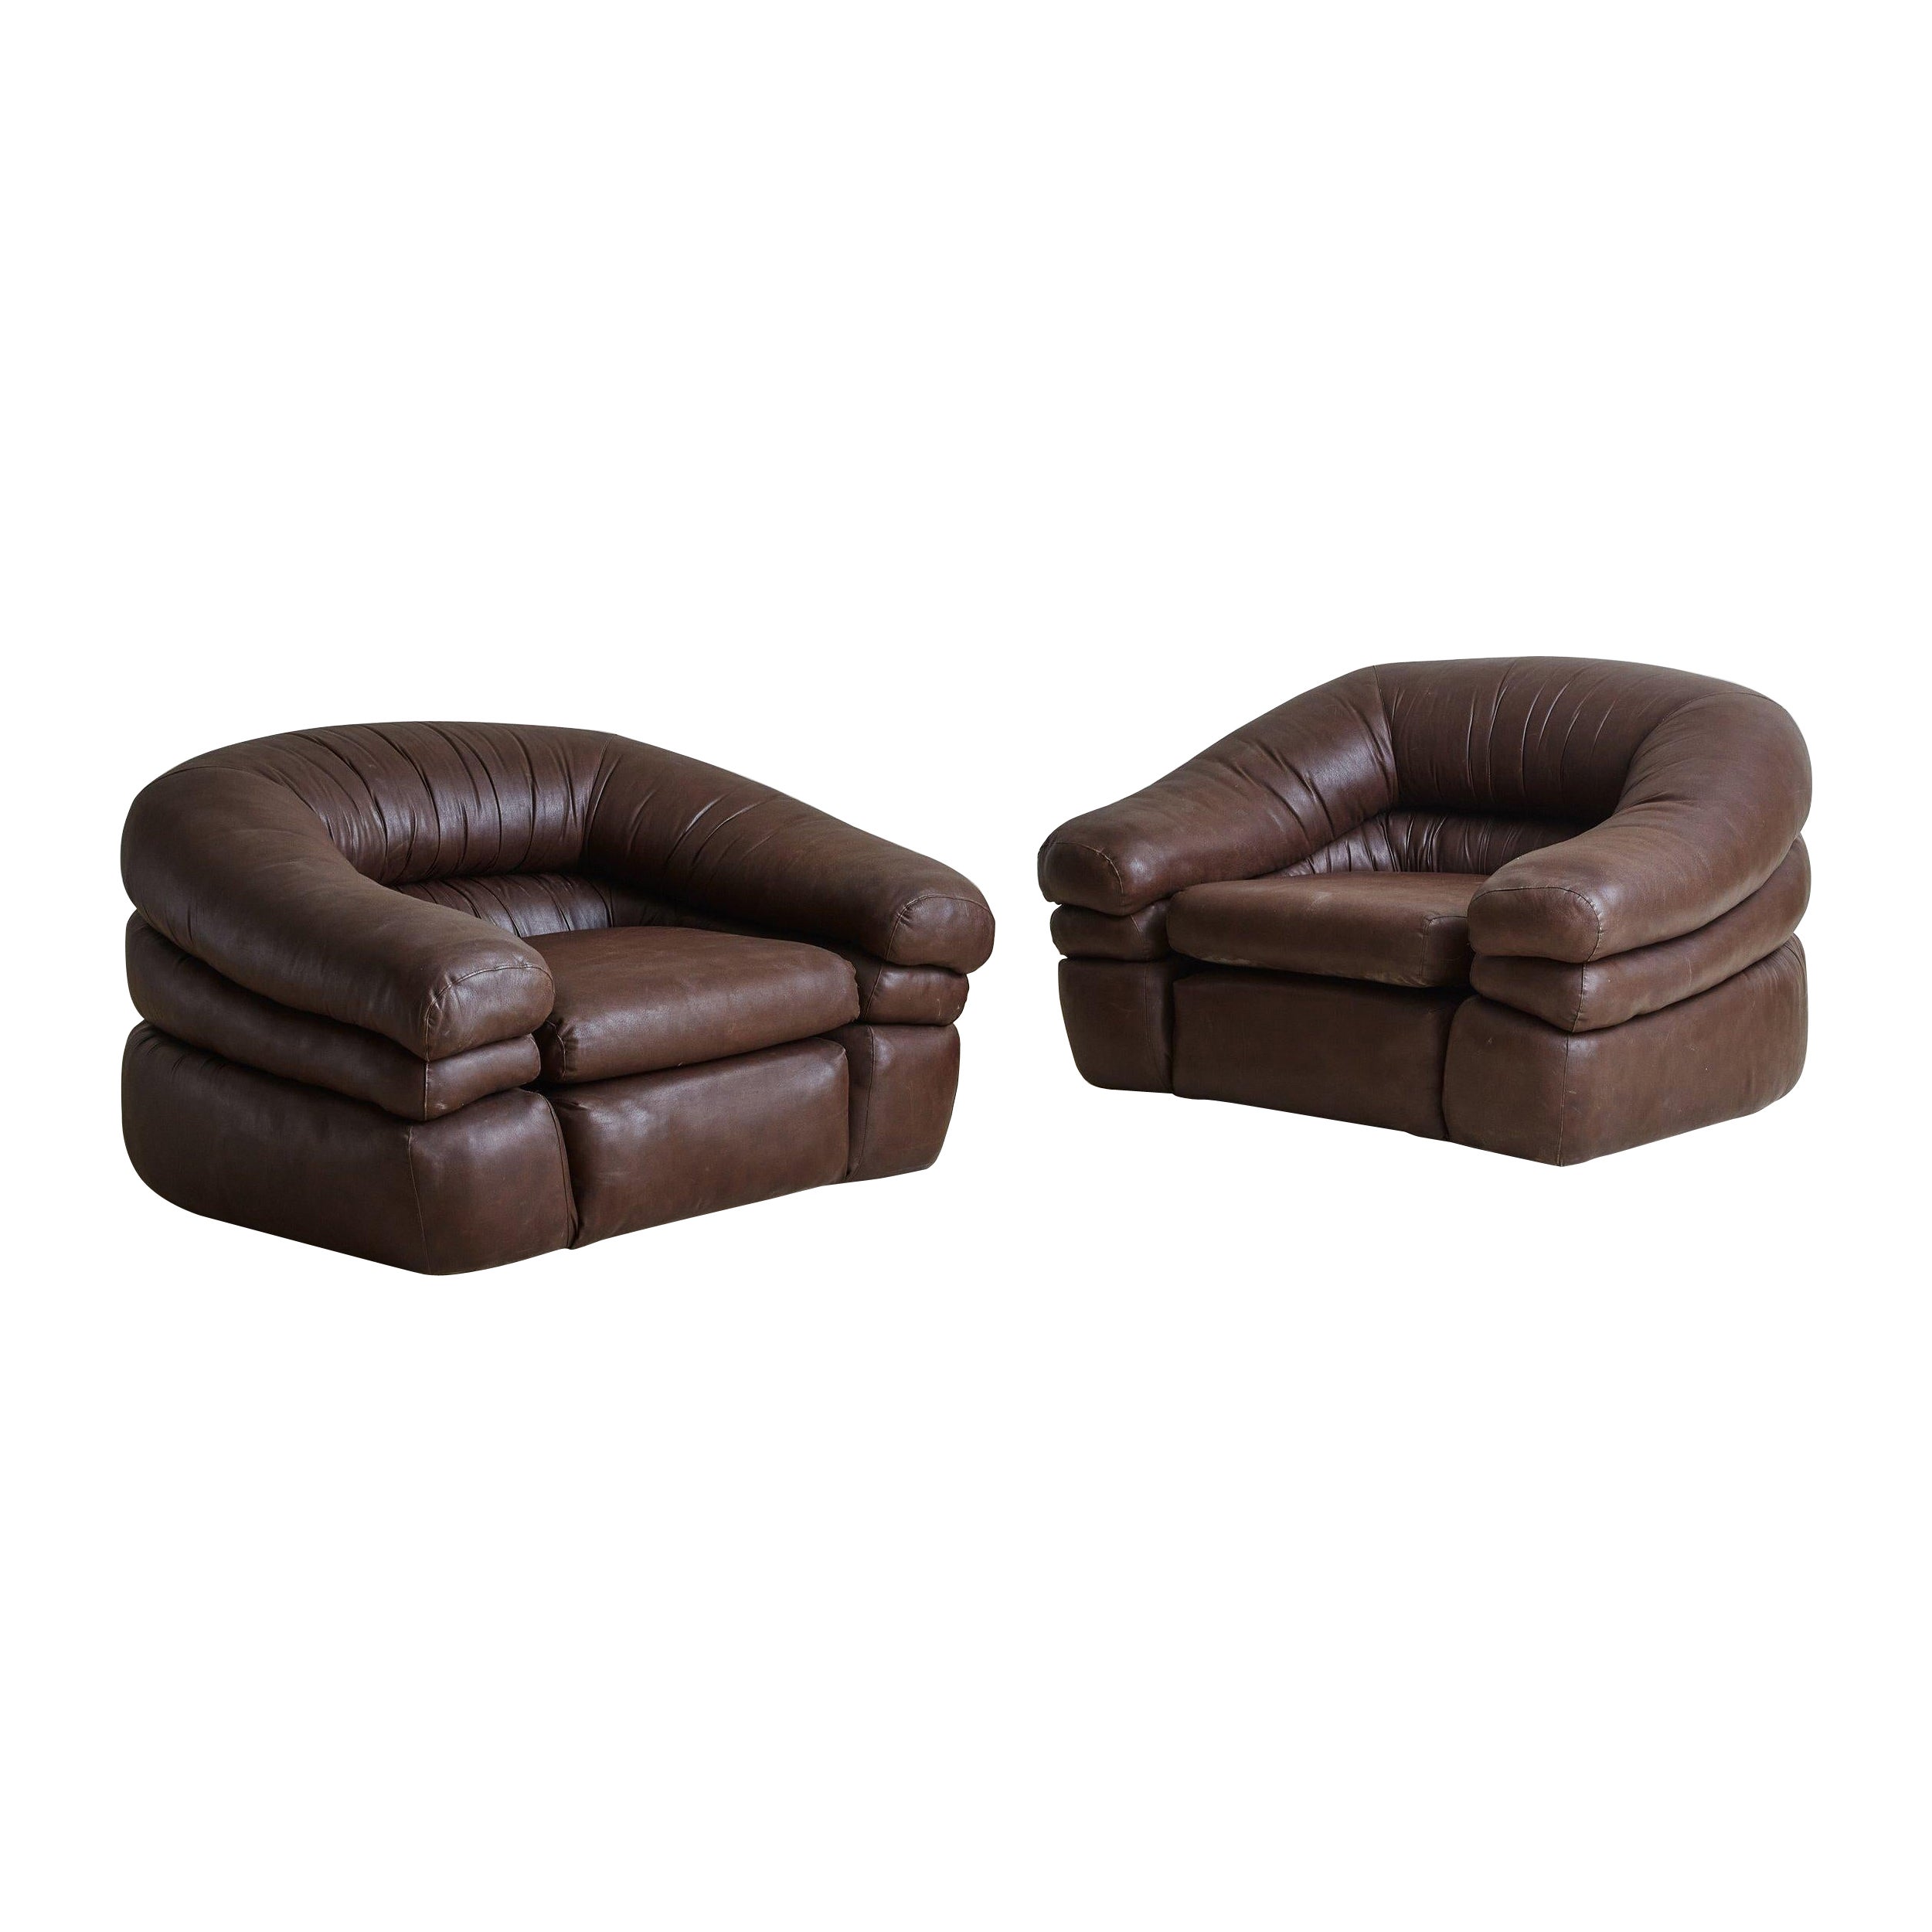 Pair of Large Brown Leather Lounge Chairs by de Pas, D’Urbino & Lomazzi, Italy